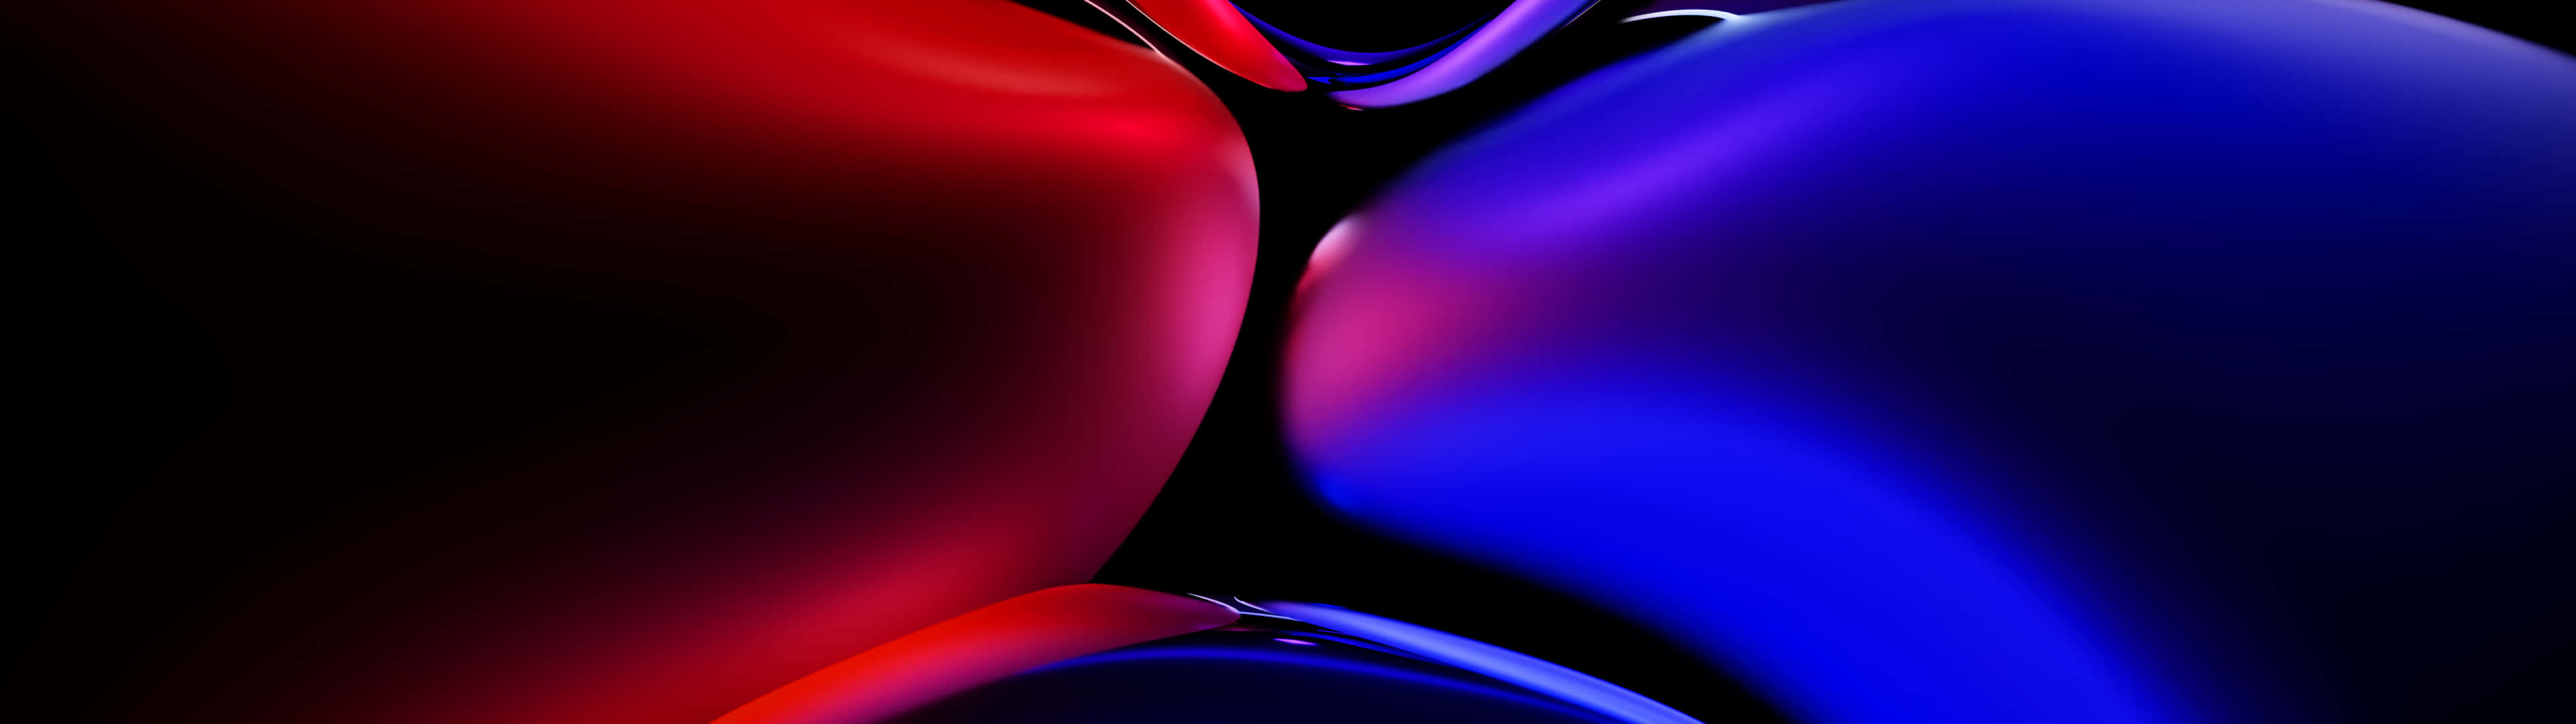 Red And Blue Ultra Hd Dual Monitor - Wallpaper Wallpaper